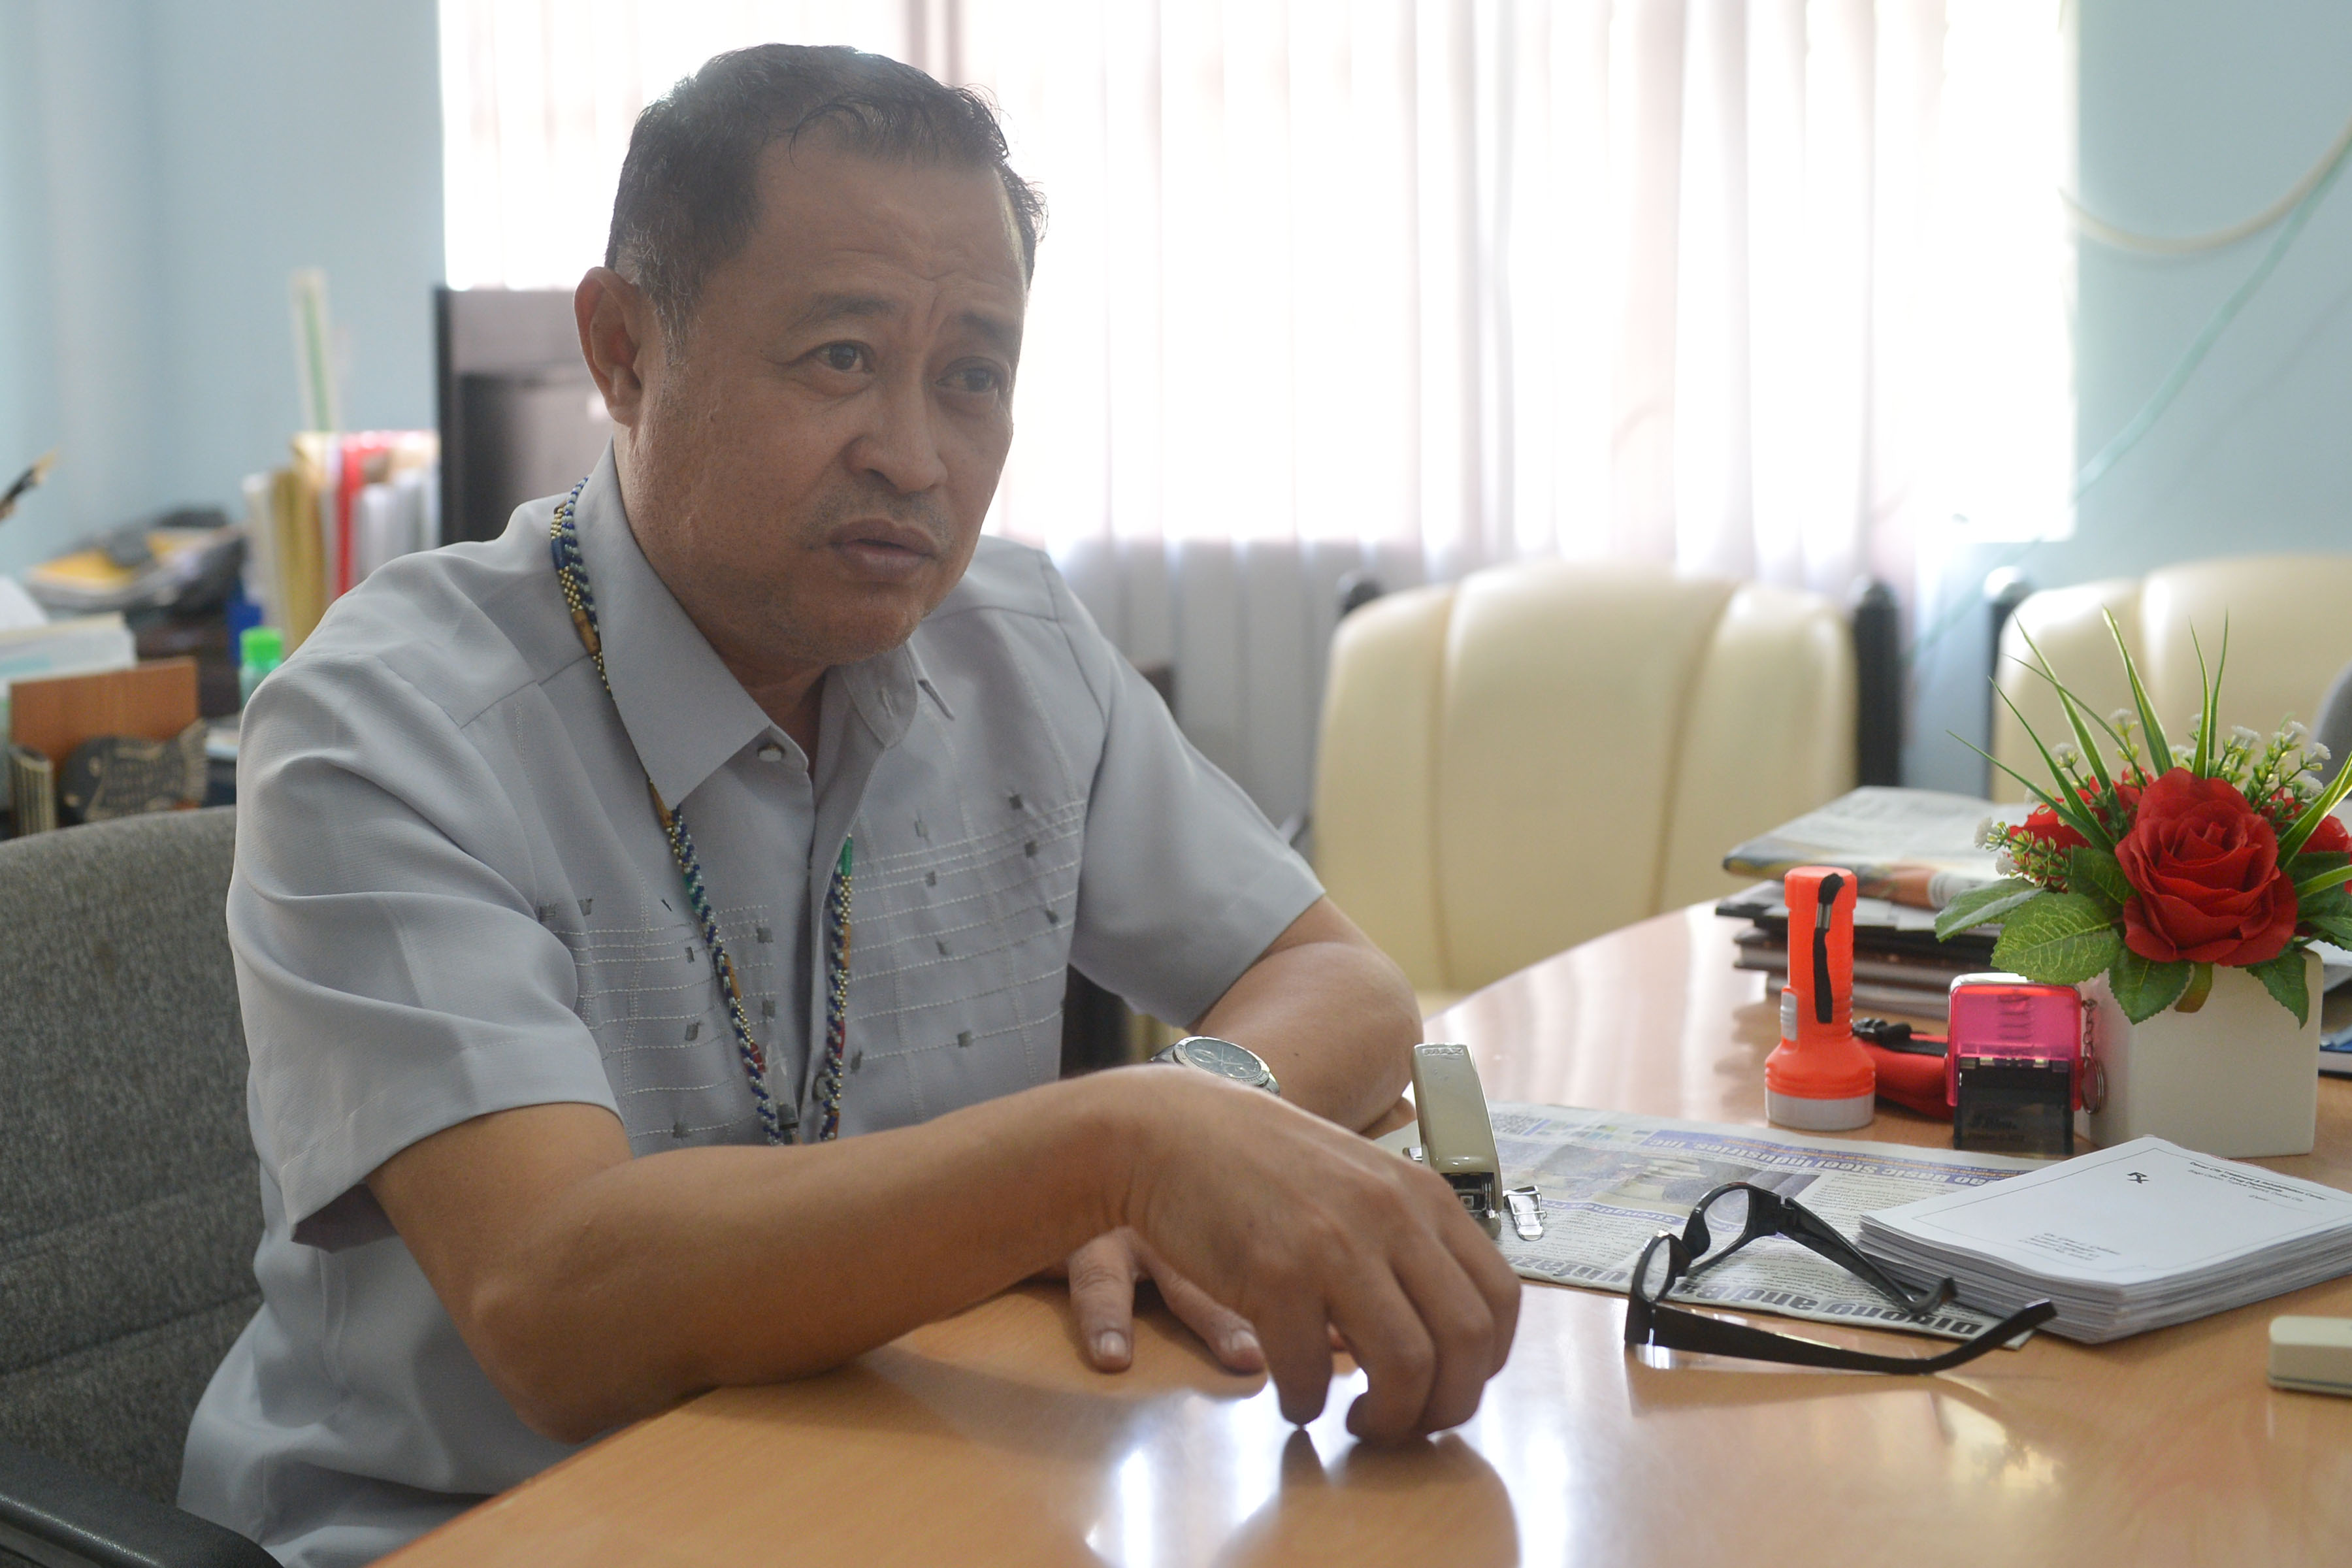 Davao City Rehabilitation Center for Drug Dependents Manager Dr. Gene Gulanes says they are concerned over the possible overcrowding and budget problems of the rehabilitation center as the number of admissions increases. (City Information Office)